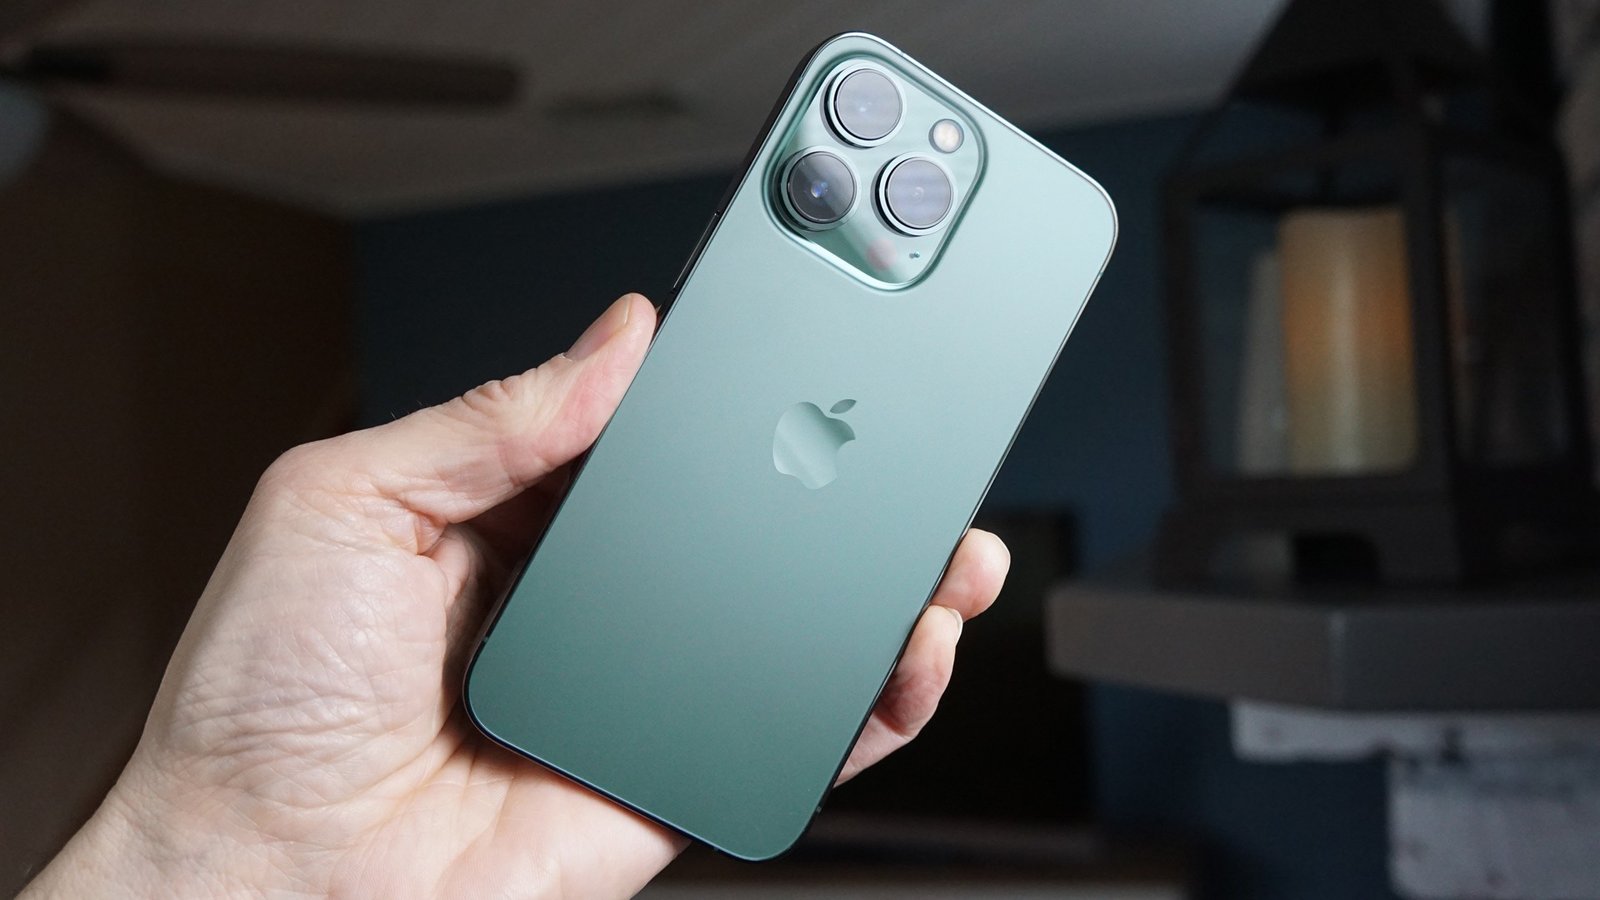 The Green Apple iPhone 13 looks like wet paint in 2022 - CyberiansTech